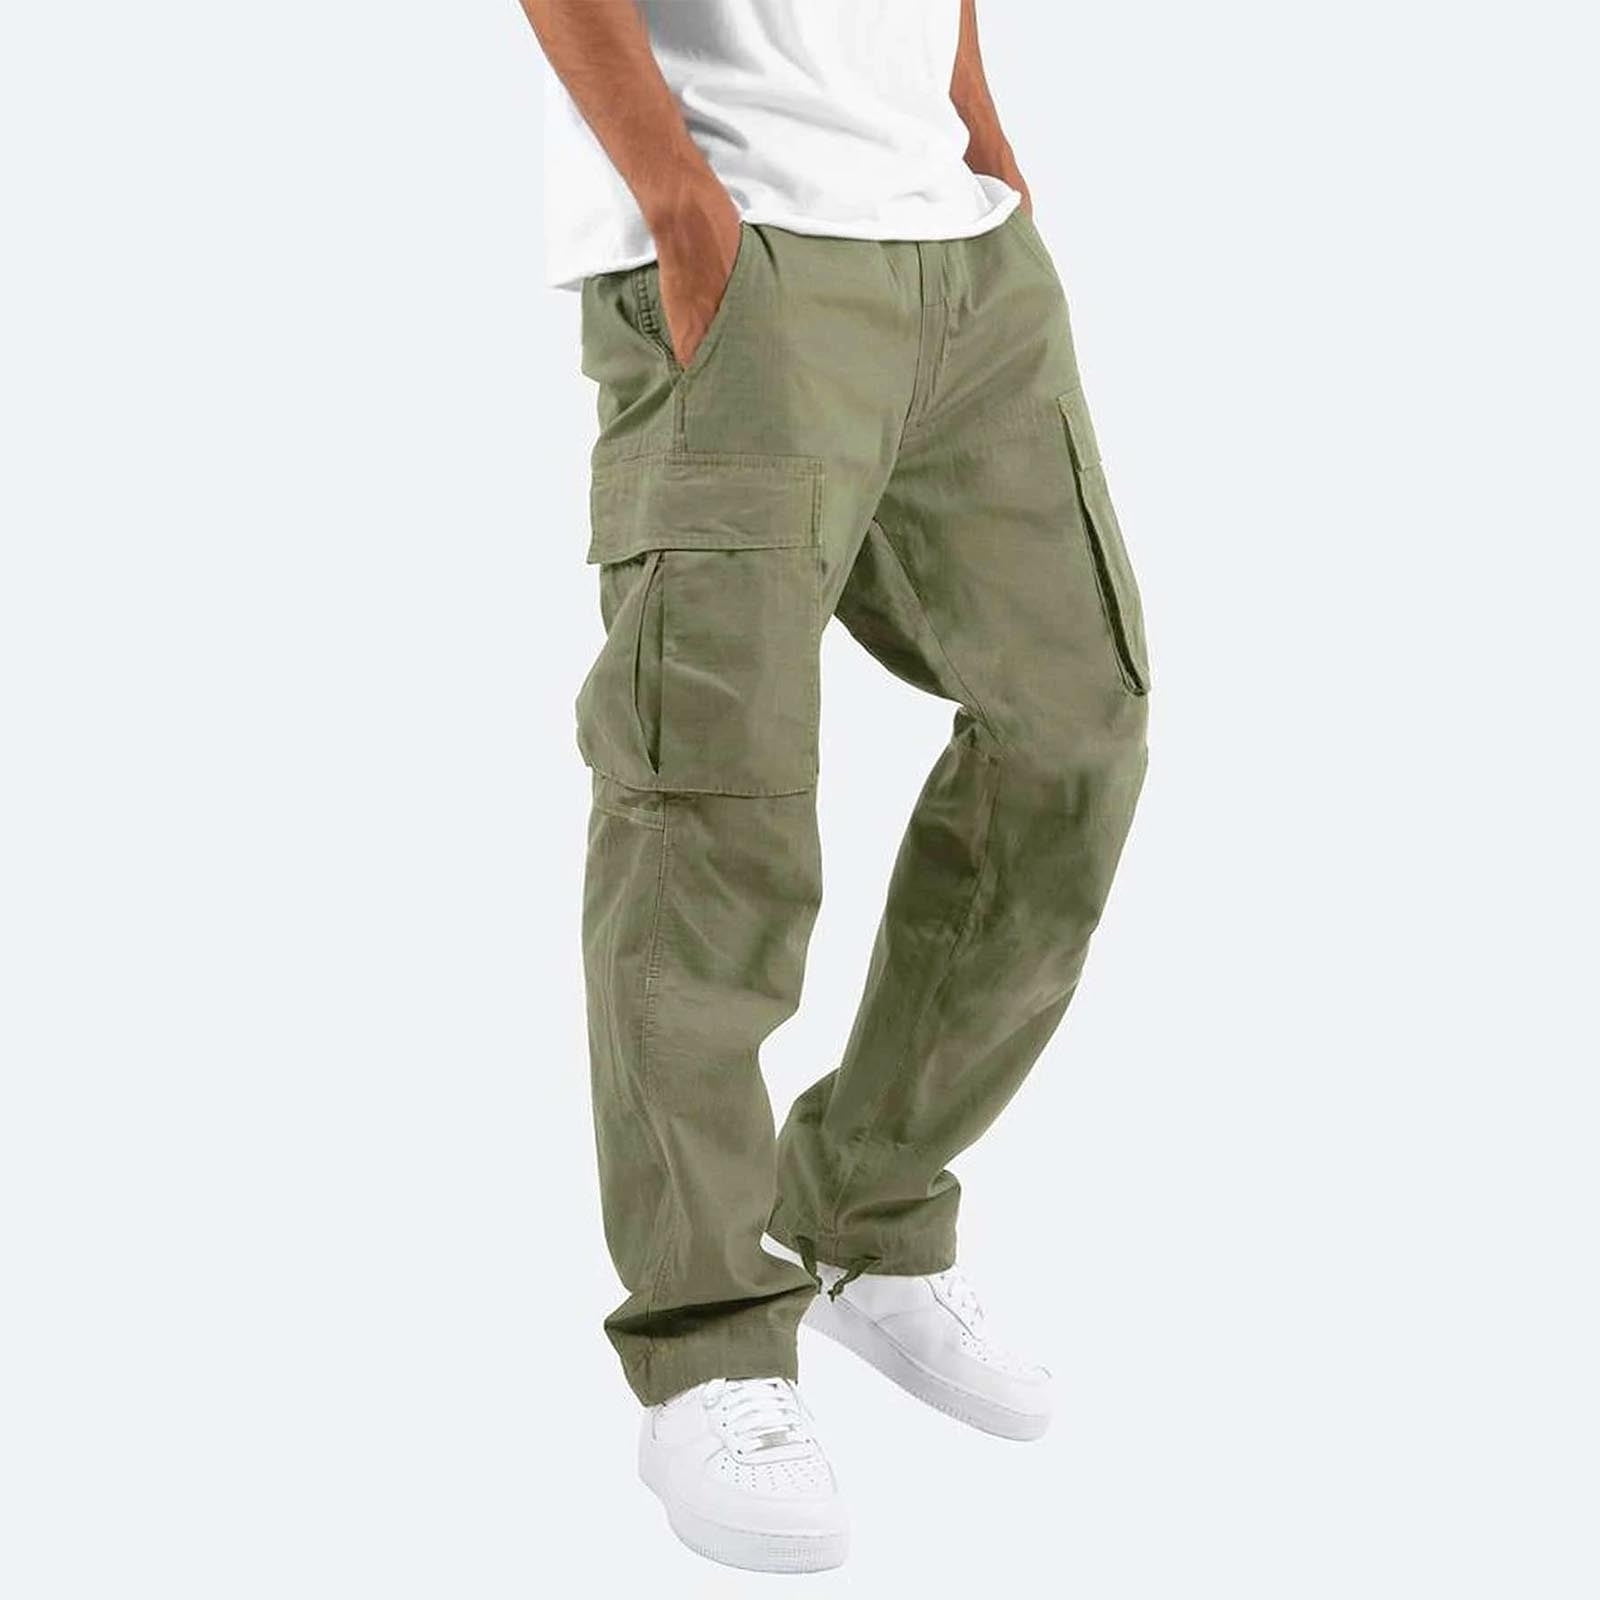 ZKCCNUK Cargo Pants for Men Solid Casual Multiple Pockets Outdoor Straight  Type Fitness Pants Cargo Pants Trousers Green XXL on Clearance